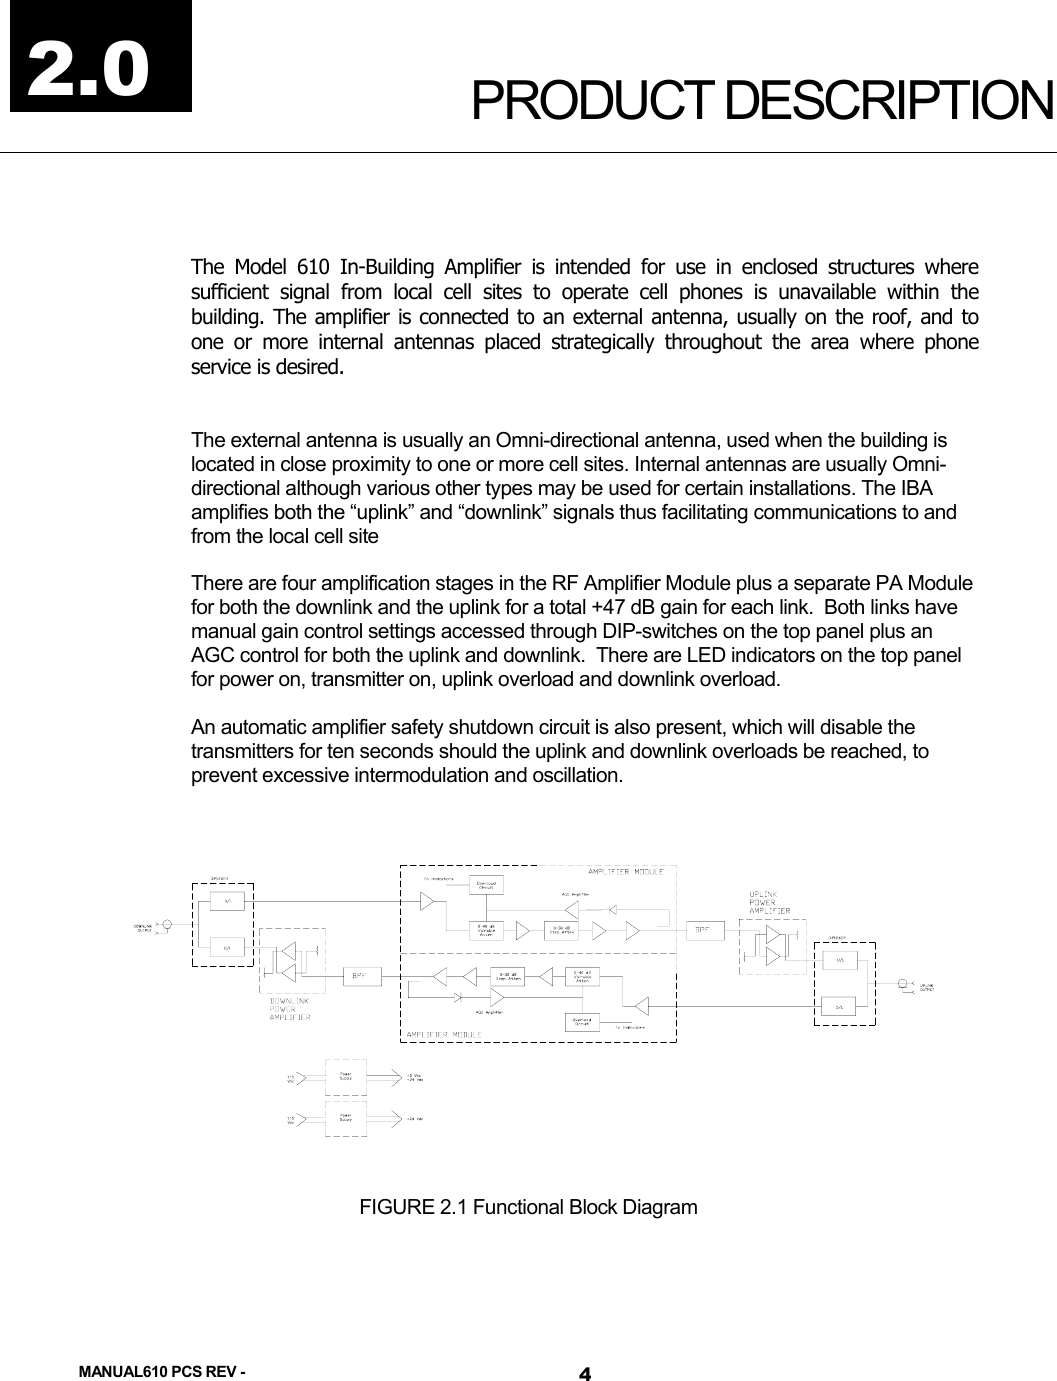  MANUAL610 PCS REV - 4 PRODUCT DESCRIPTION The Model 610 In-Building Amplifier is intended for use in enclosed structures where sufficient signal from local cell sites to operate cell phones is unavailable within the building. The amplifier is connected to an external antenna, usually on the roof, and to one or more internal antennas placed strategically throughout the area where phone service is desired.   The external antenna is usually an Omni-directional antenna, used when the building is located in close proximity to one or more cell sites. Internal antennas are usually Omni-directional although various other types may be used for certain installations. The IBA amplifies both the “uplink” and “downlink” signals thus facilitating communications to and from the local cell site  There are four amplification stages in the RF Amplifier Module plus a separate PA Module for both the downlink and the uplink for a total +47 dB gain for each link.  Both links have manual gain control settings accessed through DIP-switches on the top panel plus an AGC control for both the uplink and downlink.  There are LED indicators on the top panel for power on, transmitter on, uplink overload and downlink overload.  An automatic amplifier safety shutdown circuit is also present, which will disable the transmitters for ten seconds should the uplink and downlink overloads be reached, to prevent excessive intermodulation and oscillation.   FIGURE 2.1 Functional Block Diagram 2.0 